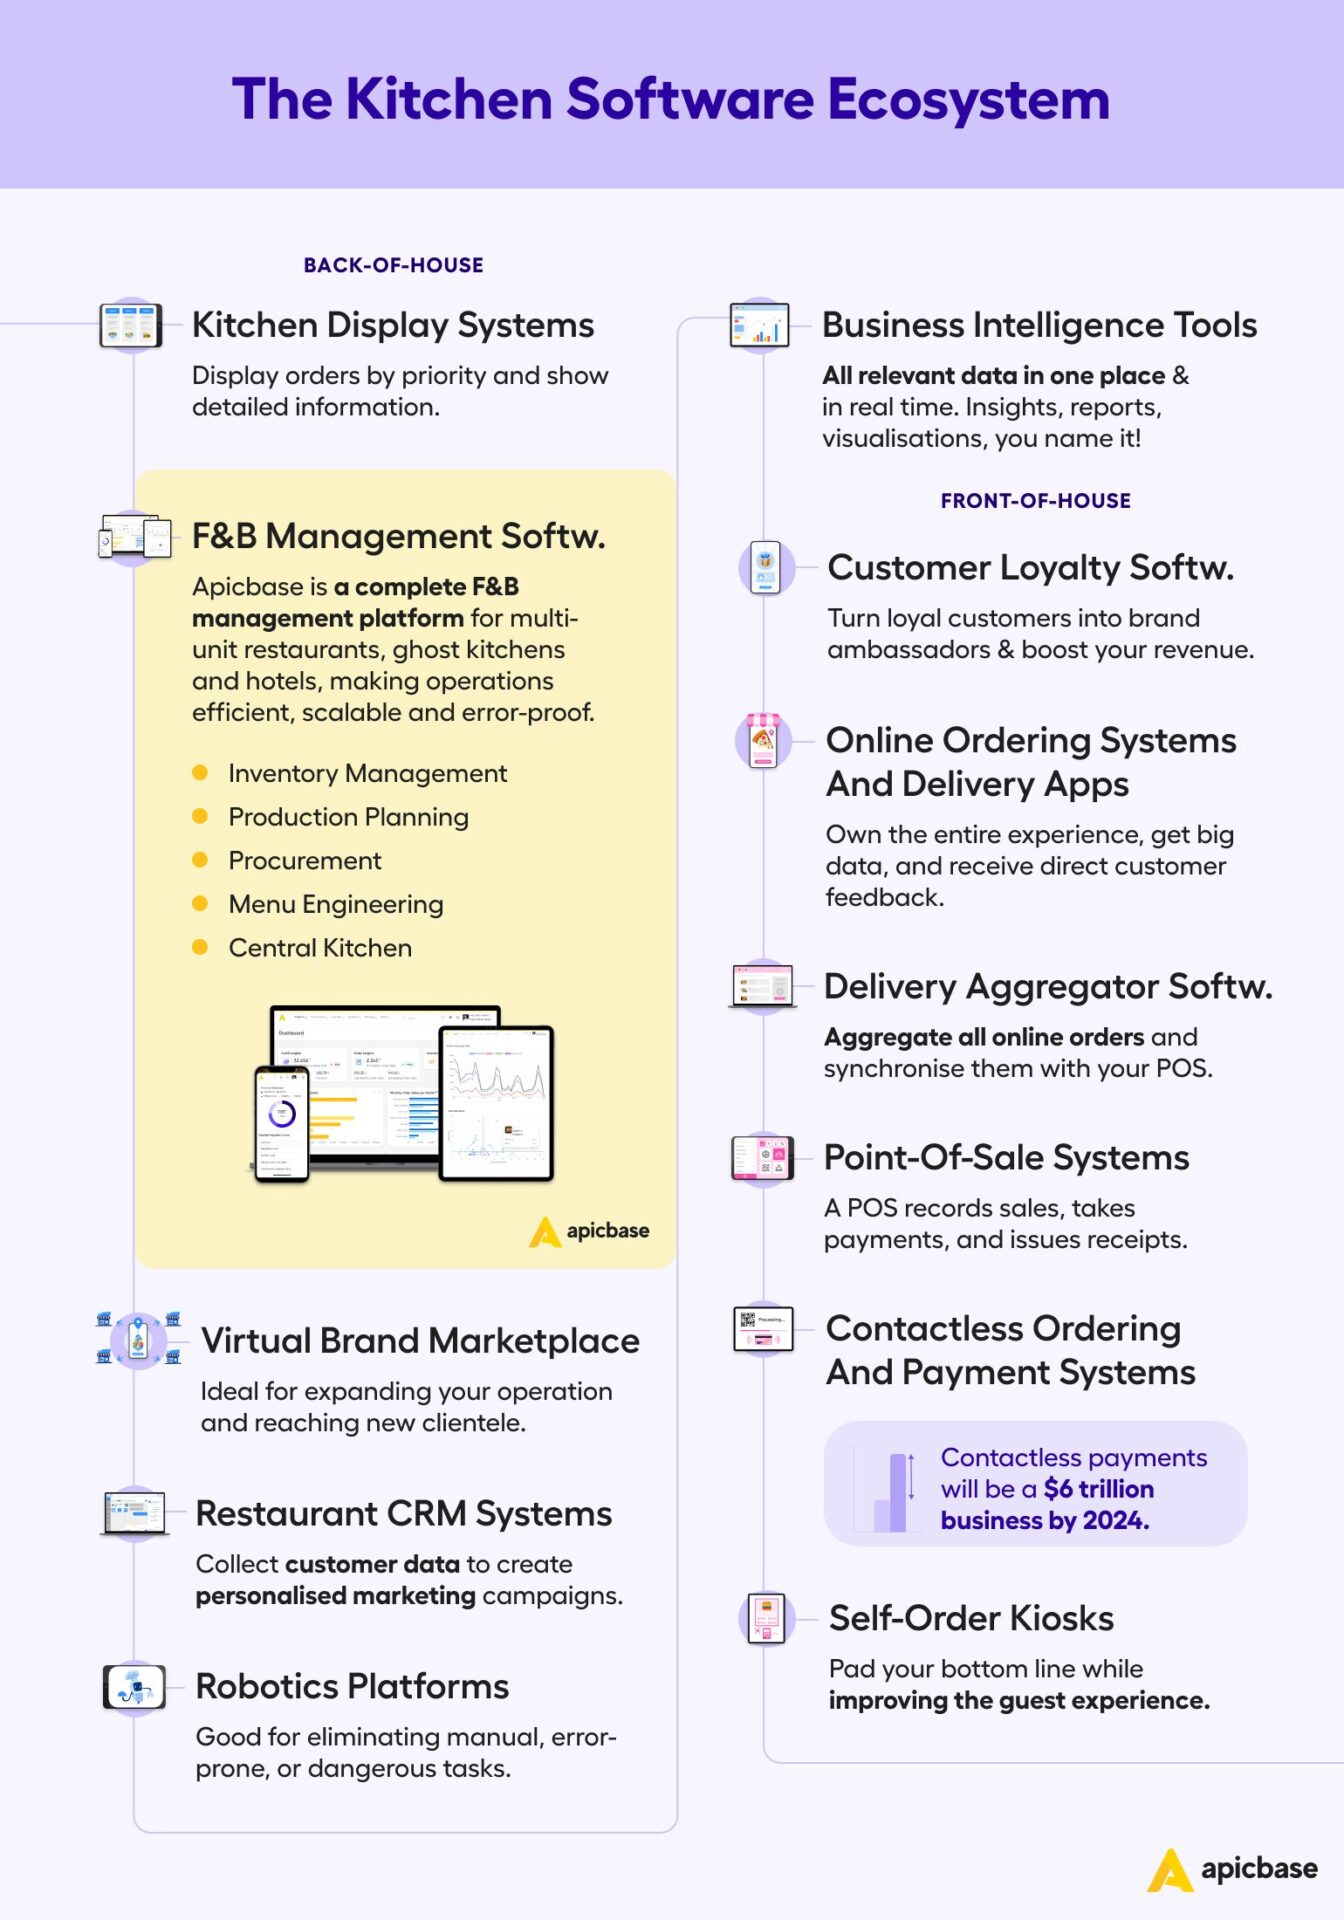 The Kitchen Software Ecosystem